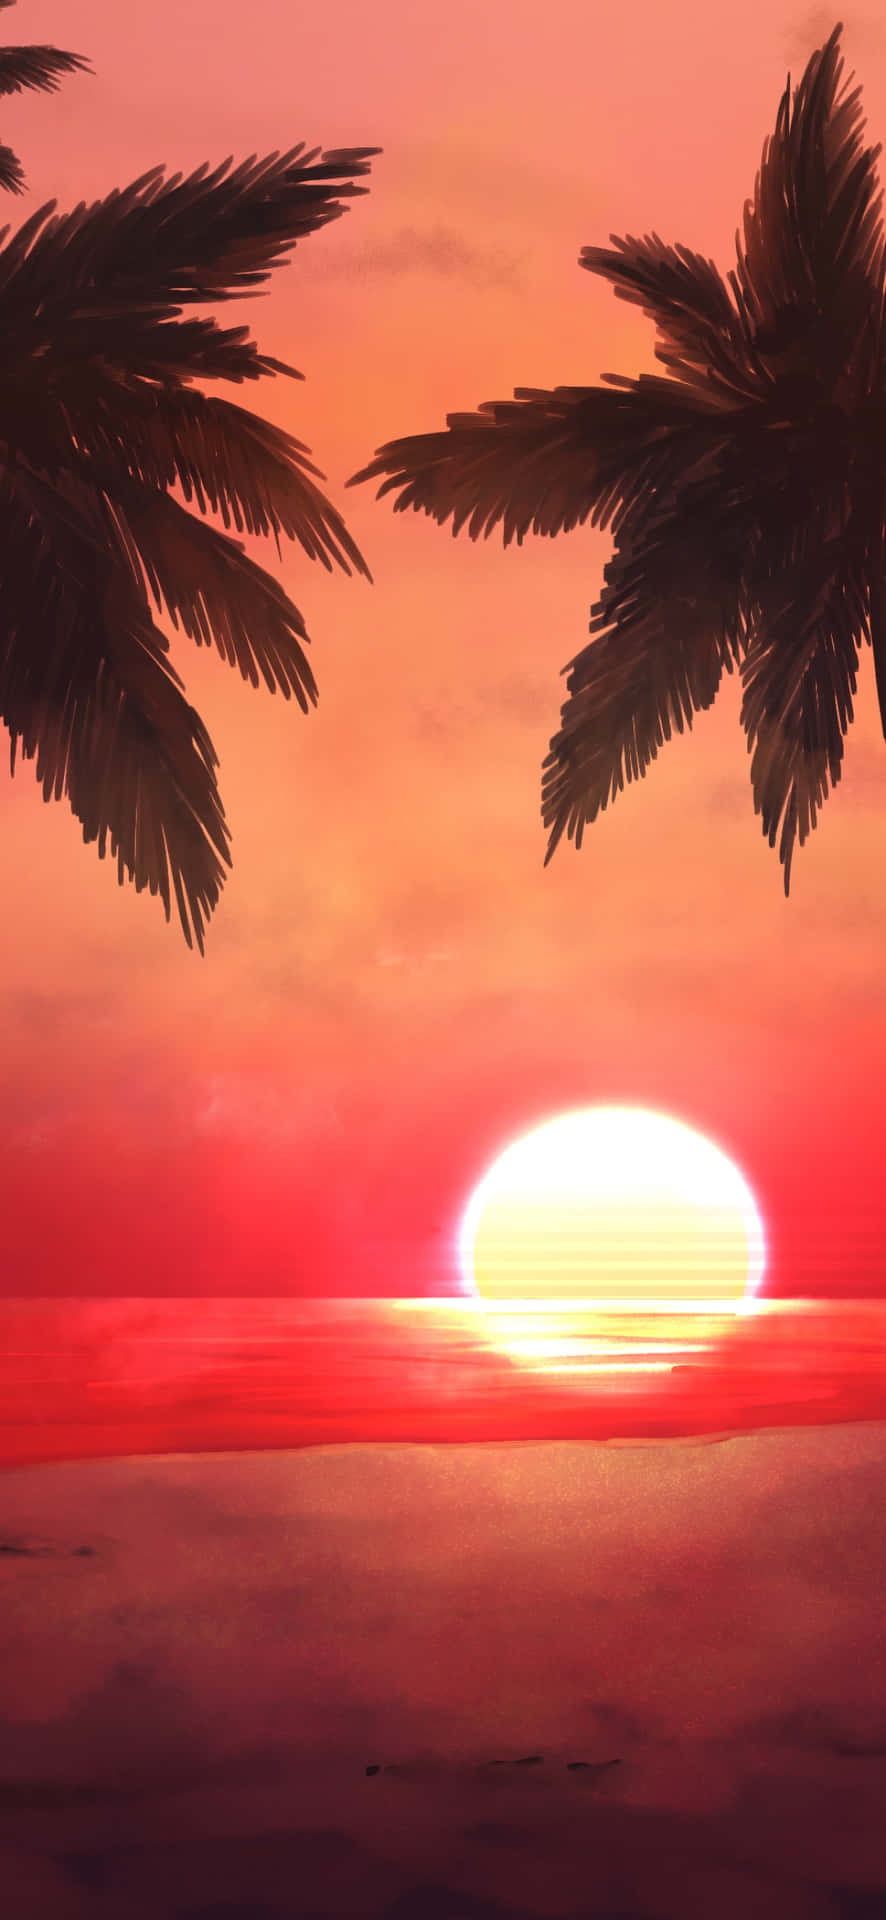 A Painting Of Palm Trees On A Beach With A Sunset Wallpaper